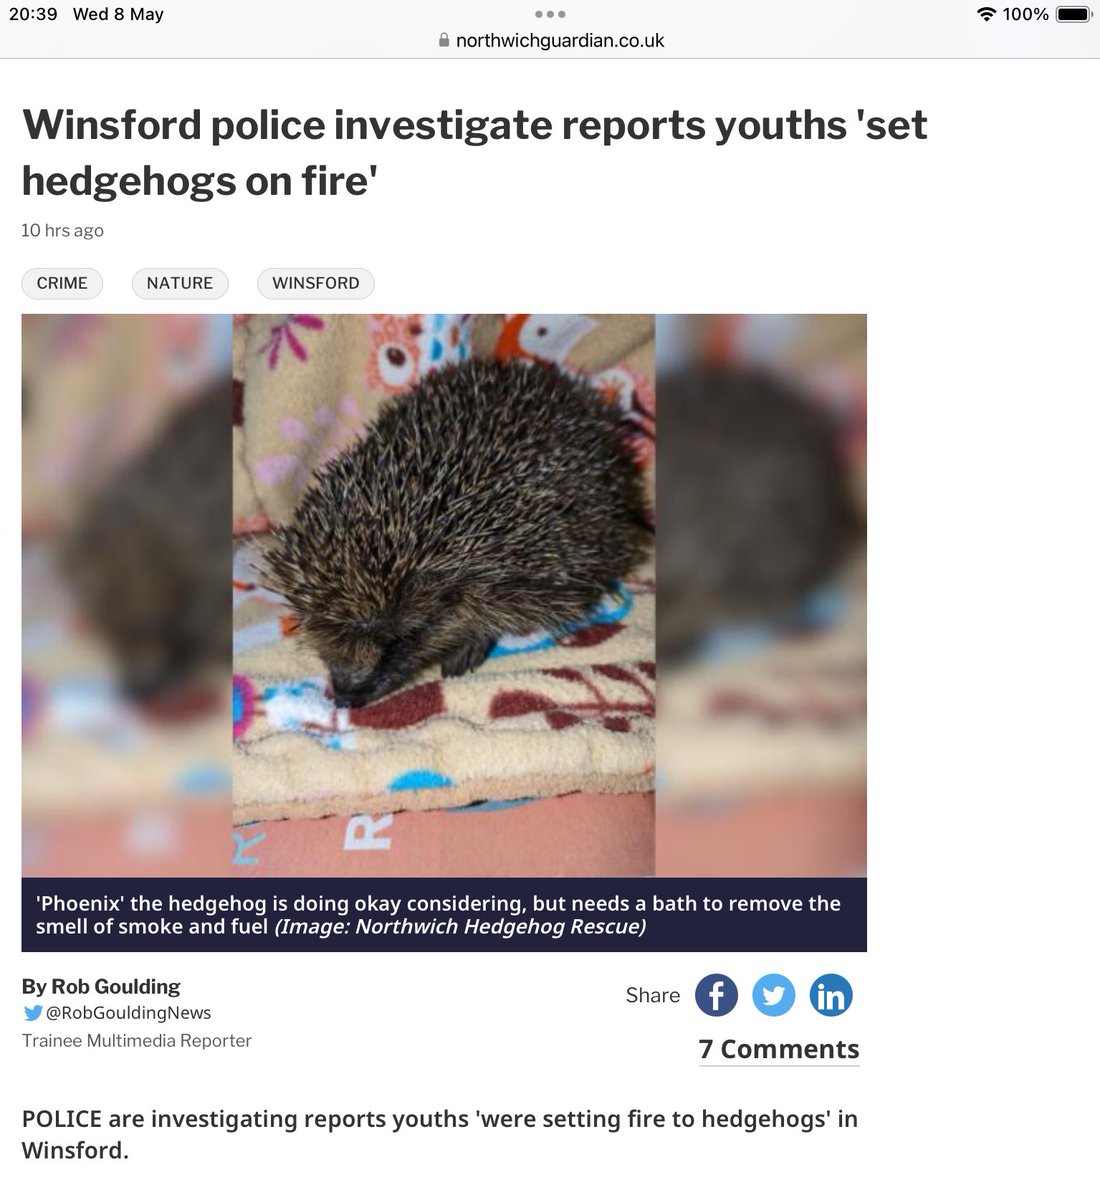 I’m still trying to get an iconic species in serious decline greater legal protection. Acts of violence & torture continue unabated across the UK even during #HedgehogWeek My petition to add #hedgehogs to Schedule 5 Wildlife & Countryside Act 1981 now has almost 213,00…